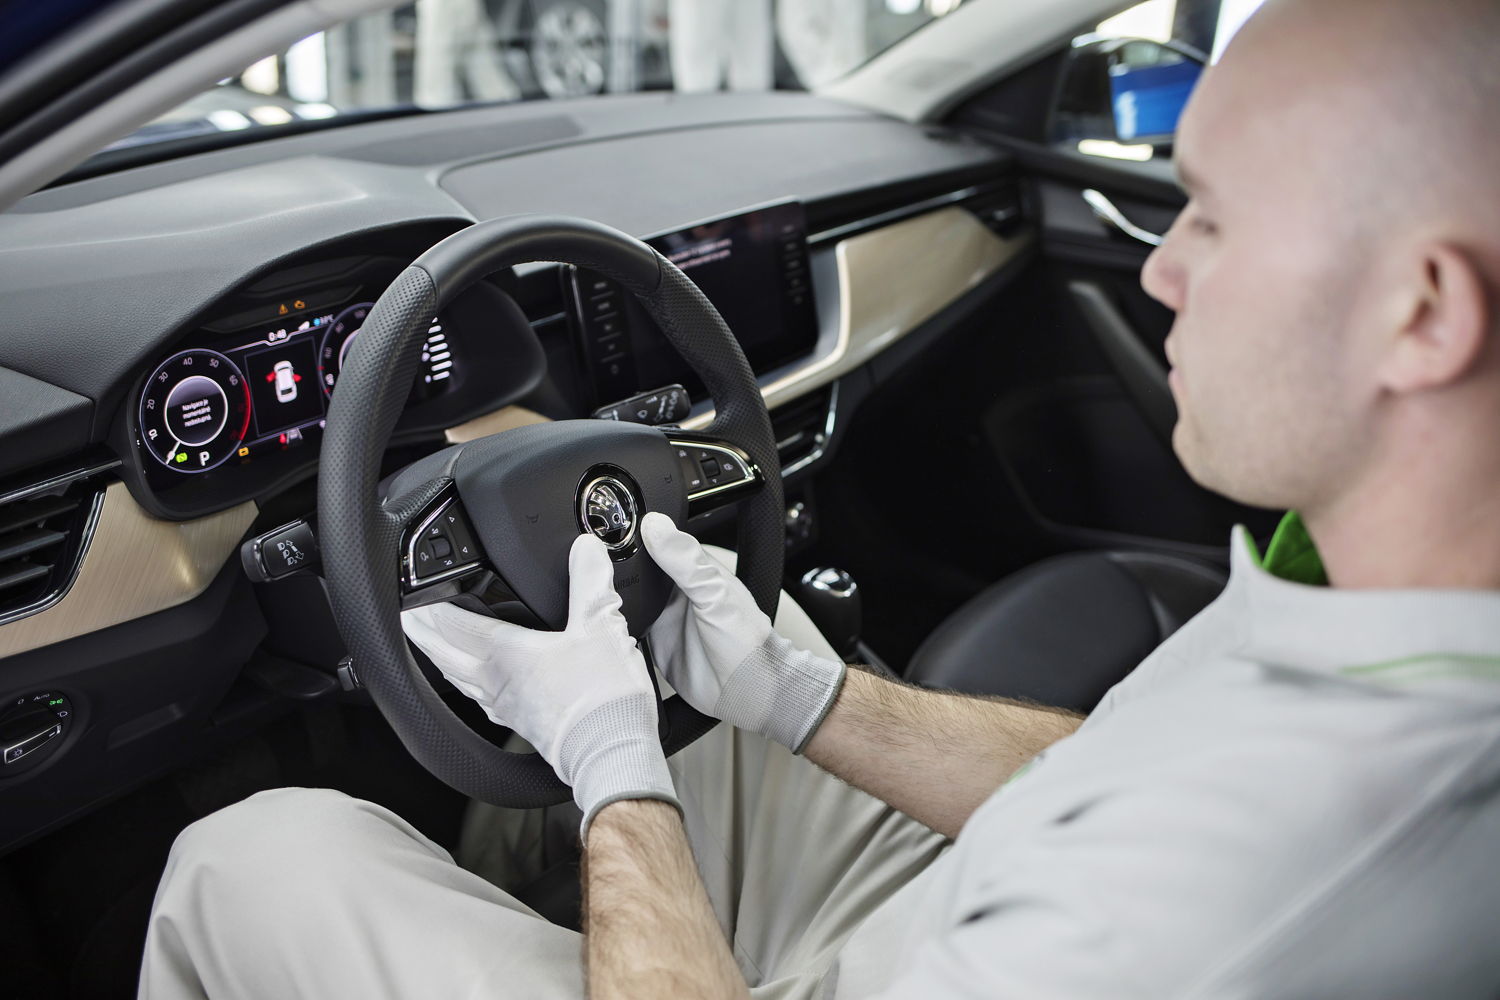 The optional Virtual Cockpit features a 10.25-inch display
– the largest in the segment. Infotainment systems from
the third generation of the MIB modular infotainment
matrix come with a screen size ranging from 6.5 inches
up to 9.2 inches.